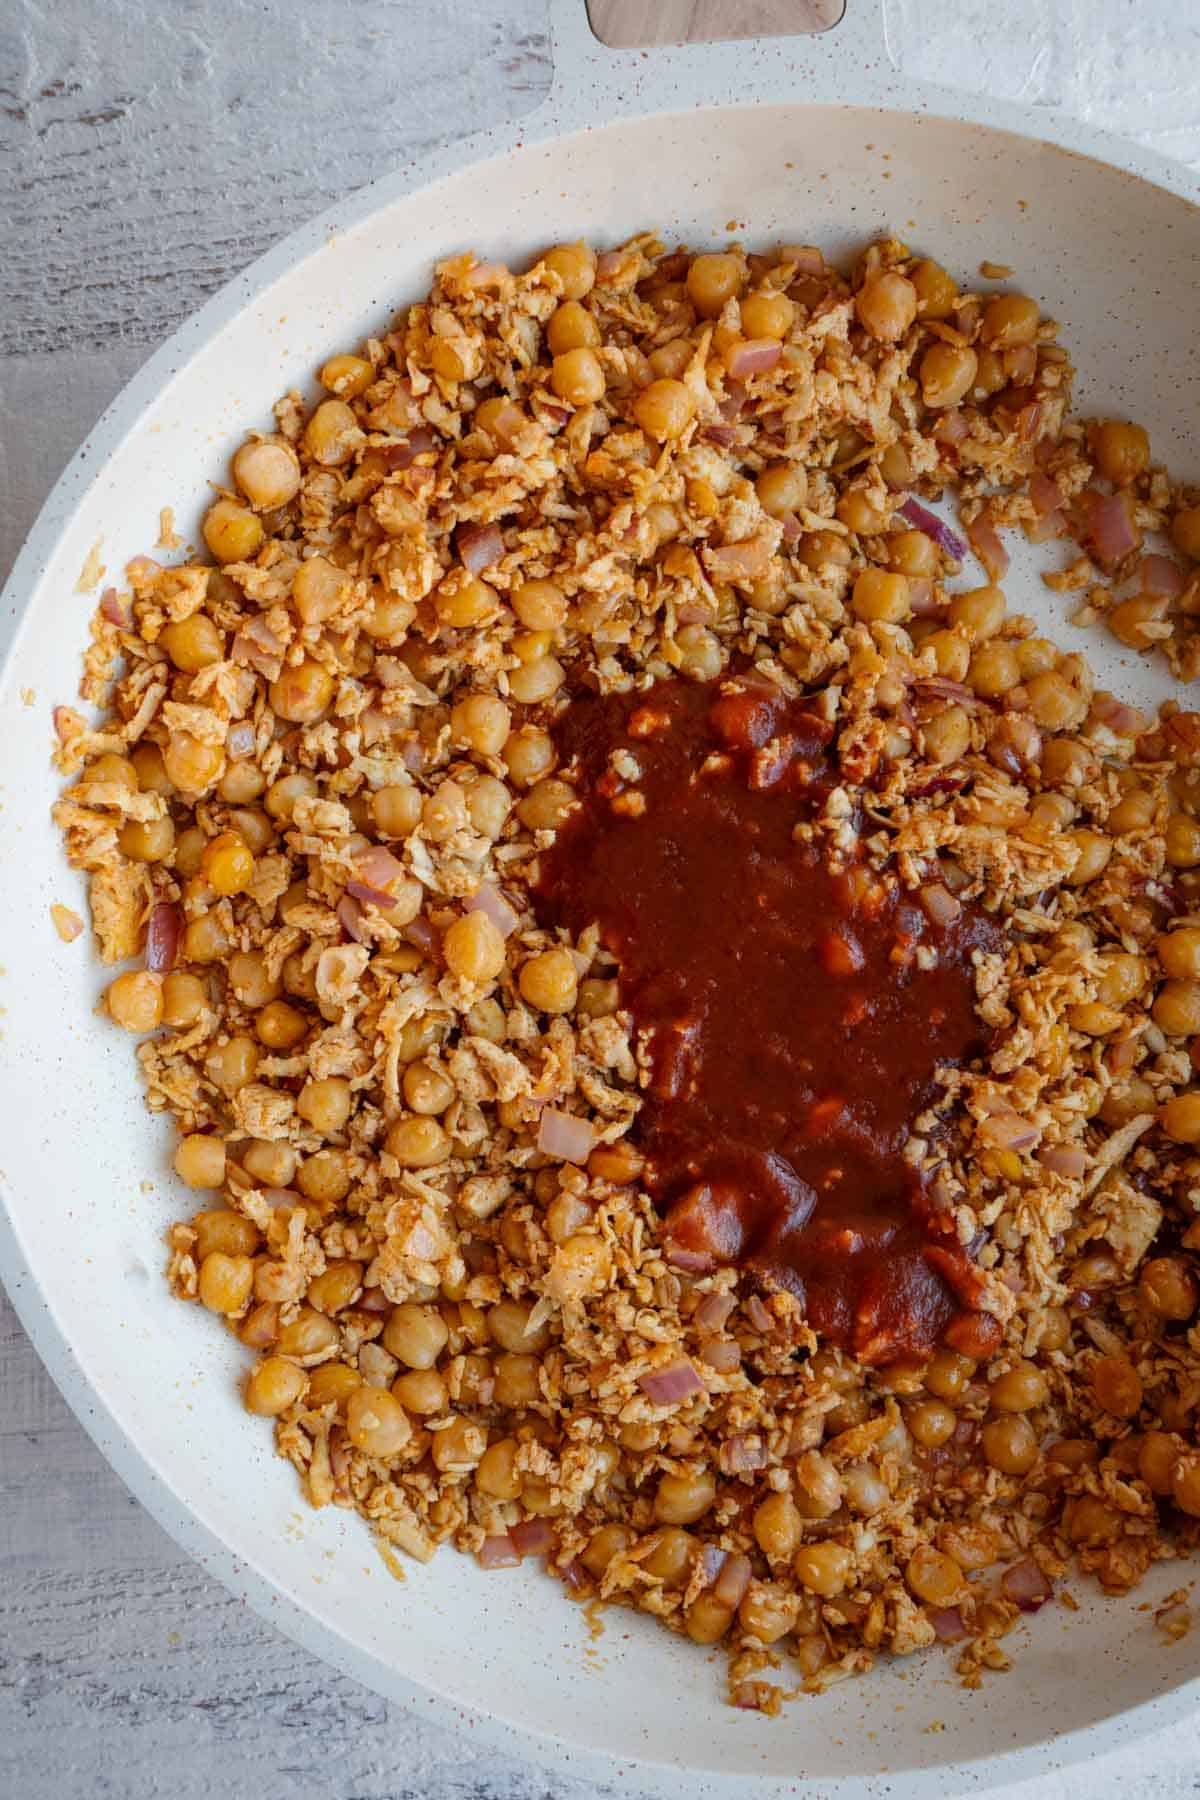 Tofu, chickpeas, and hot sauce cooking in a white skillet.